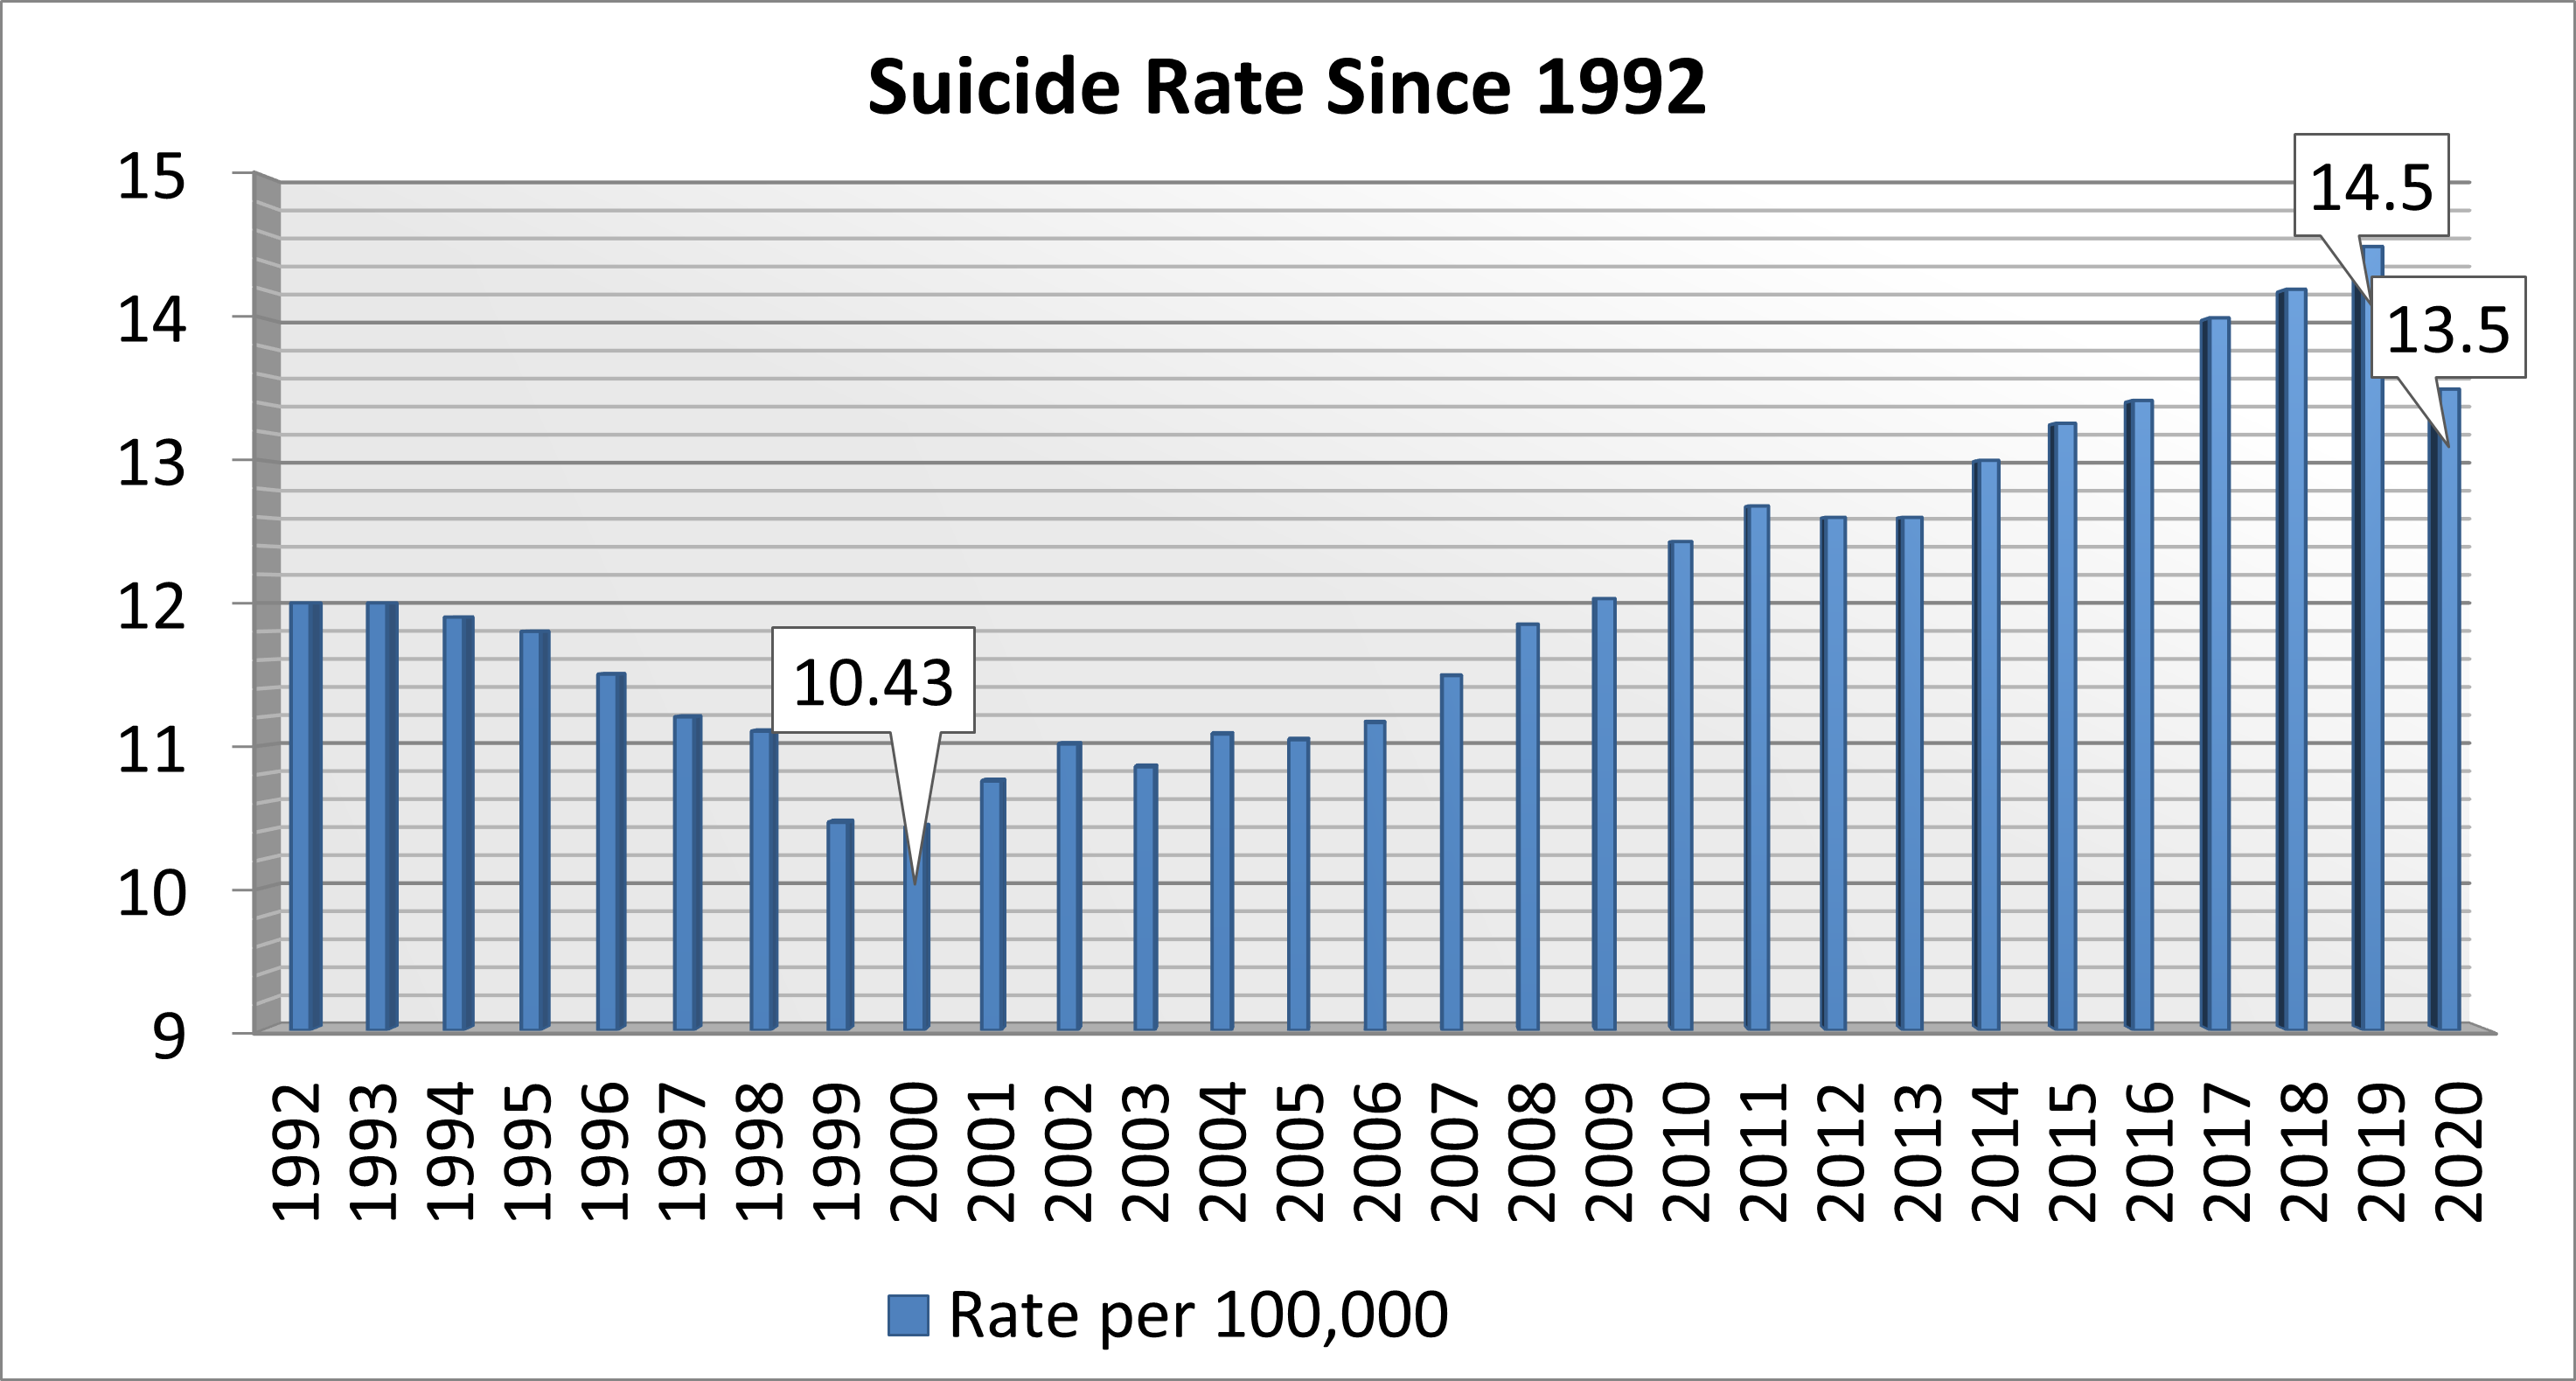 Suicide rates in the U.S. based on CDC data